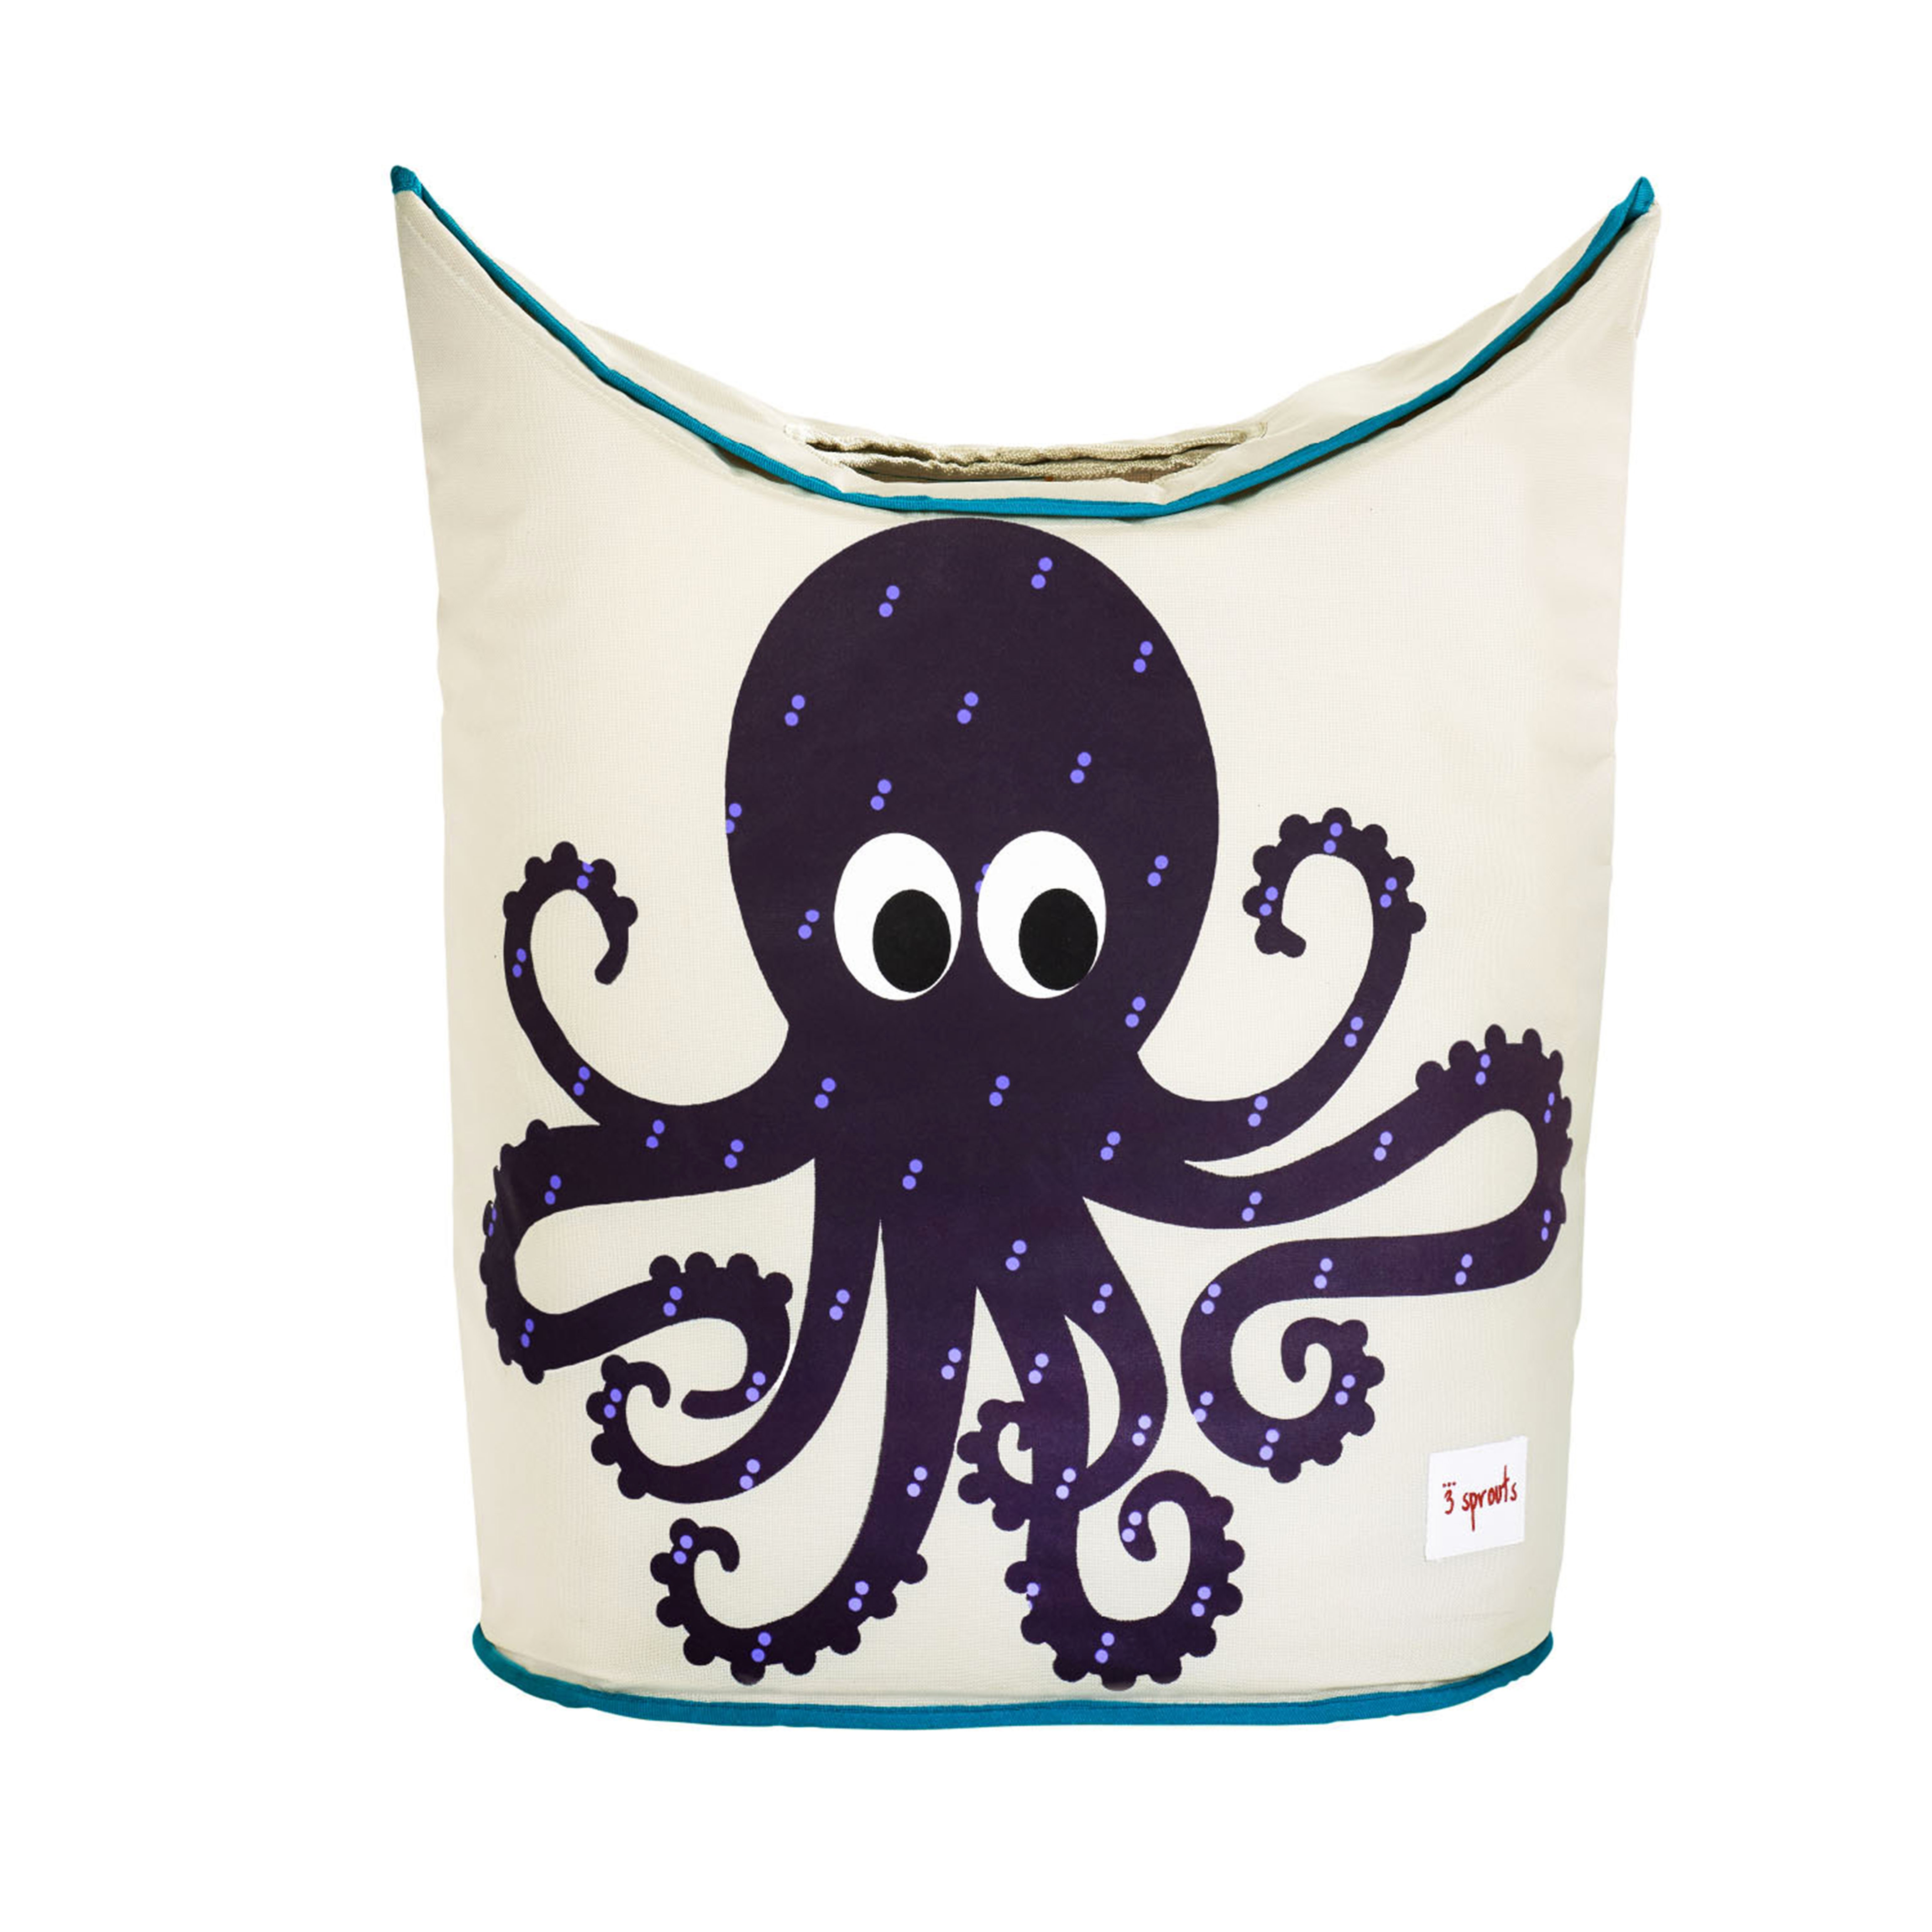 3 Sprouts - Laundry Hamper - Purple Octopus - Baby og barn